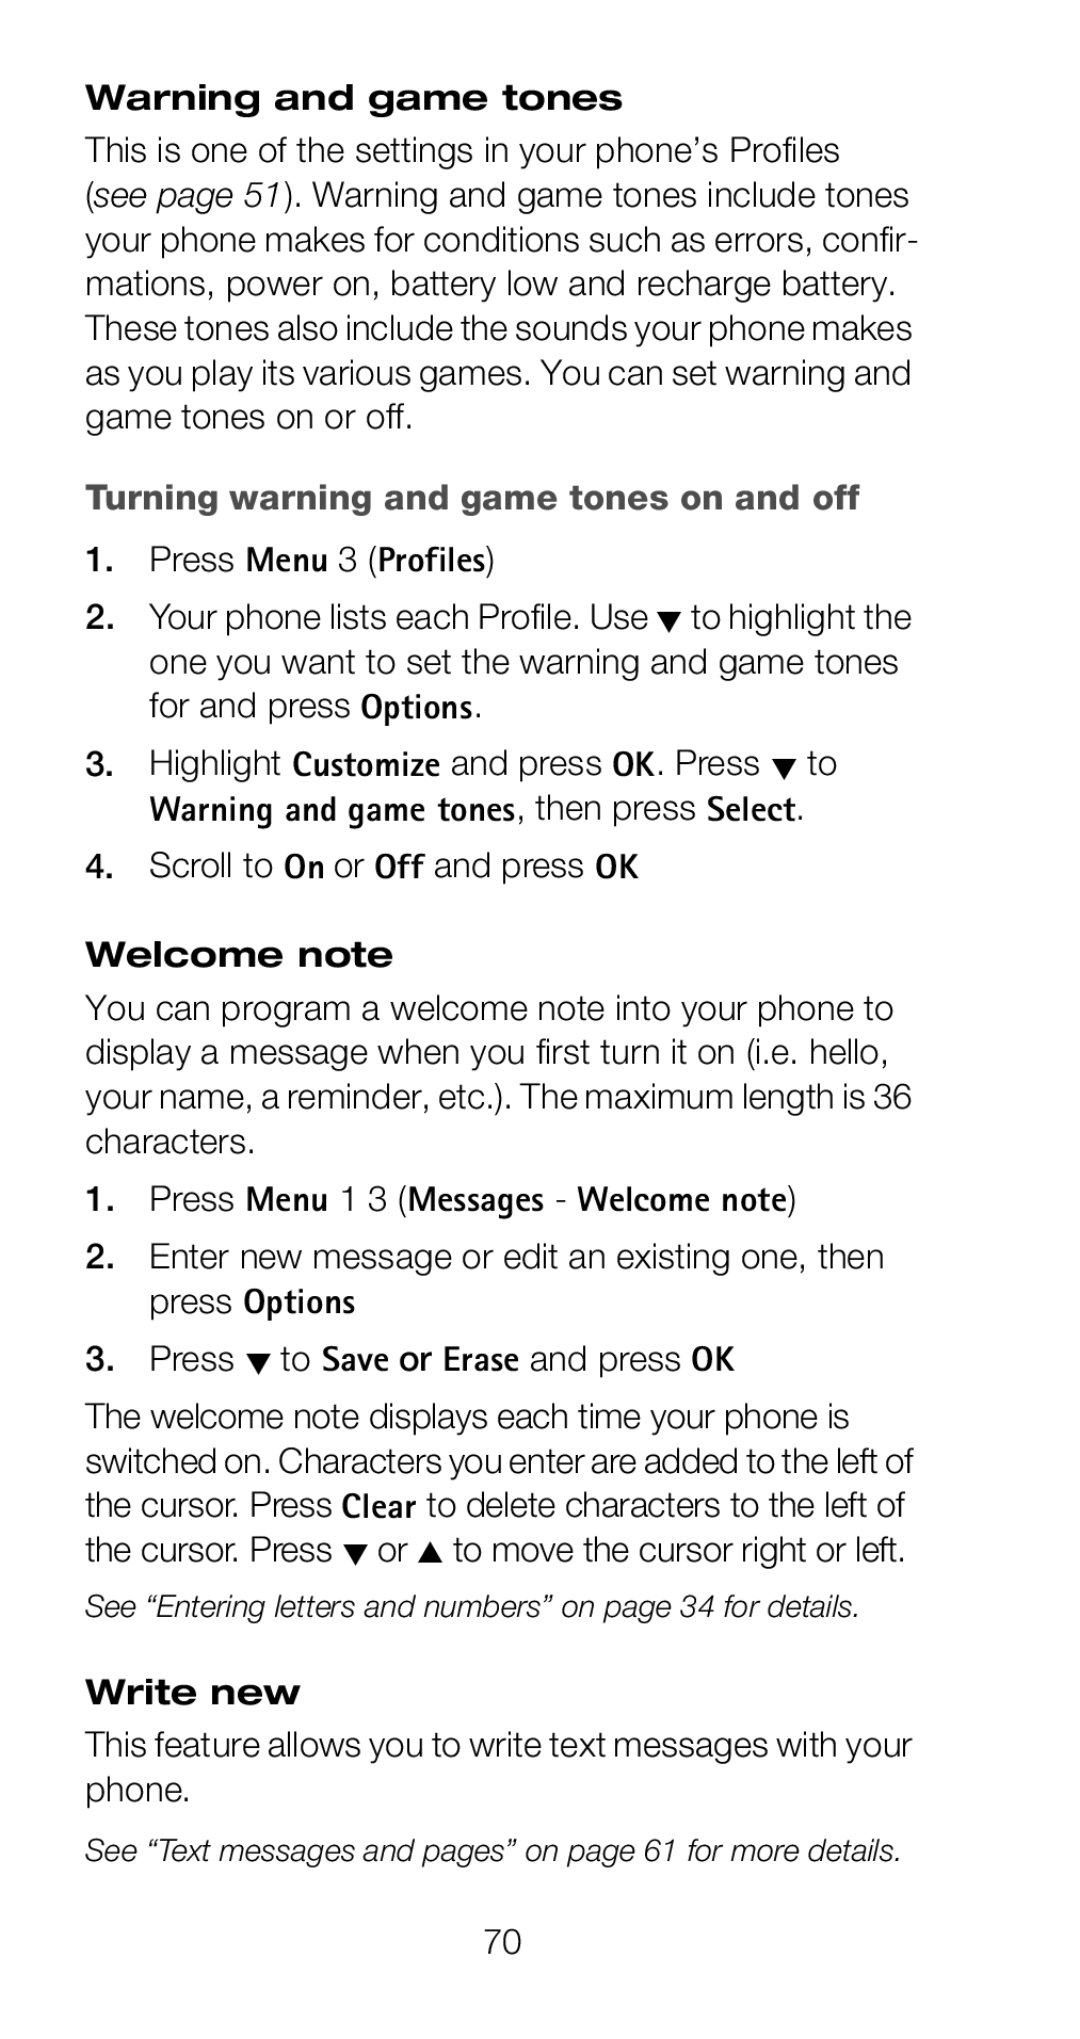 Nokia 6160 manual Turning warning and game tones on and off, Scroll to On or Off and press OK, Welcome note, Write new 